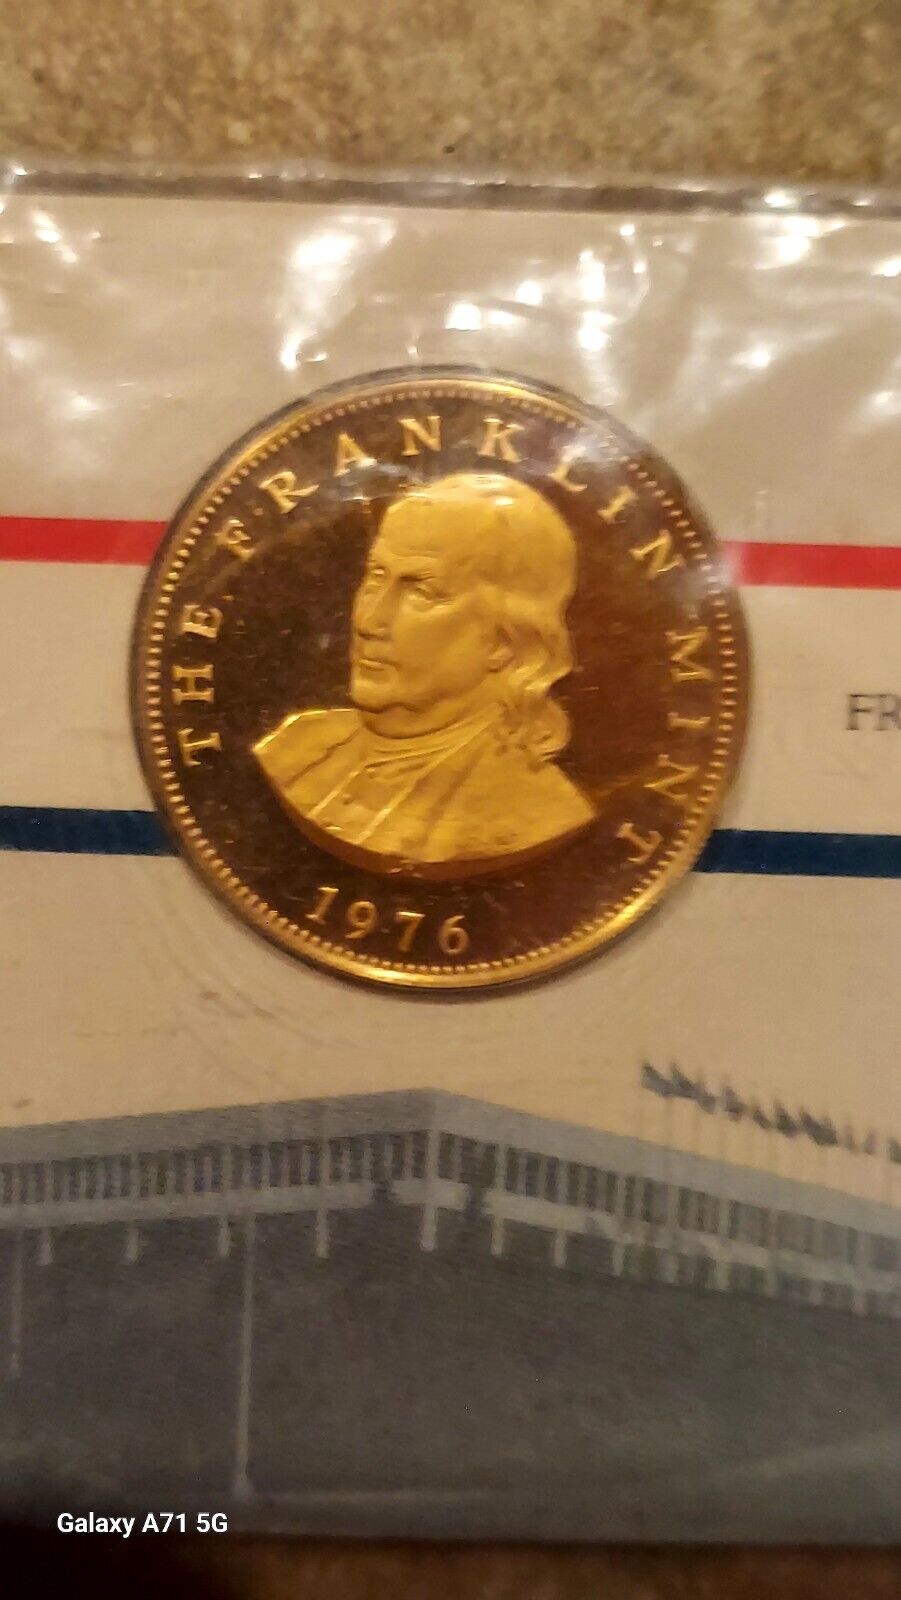 The Franklin Mint & Museum card with Benjamin Franklin 1976 medallion coin